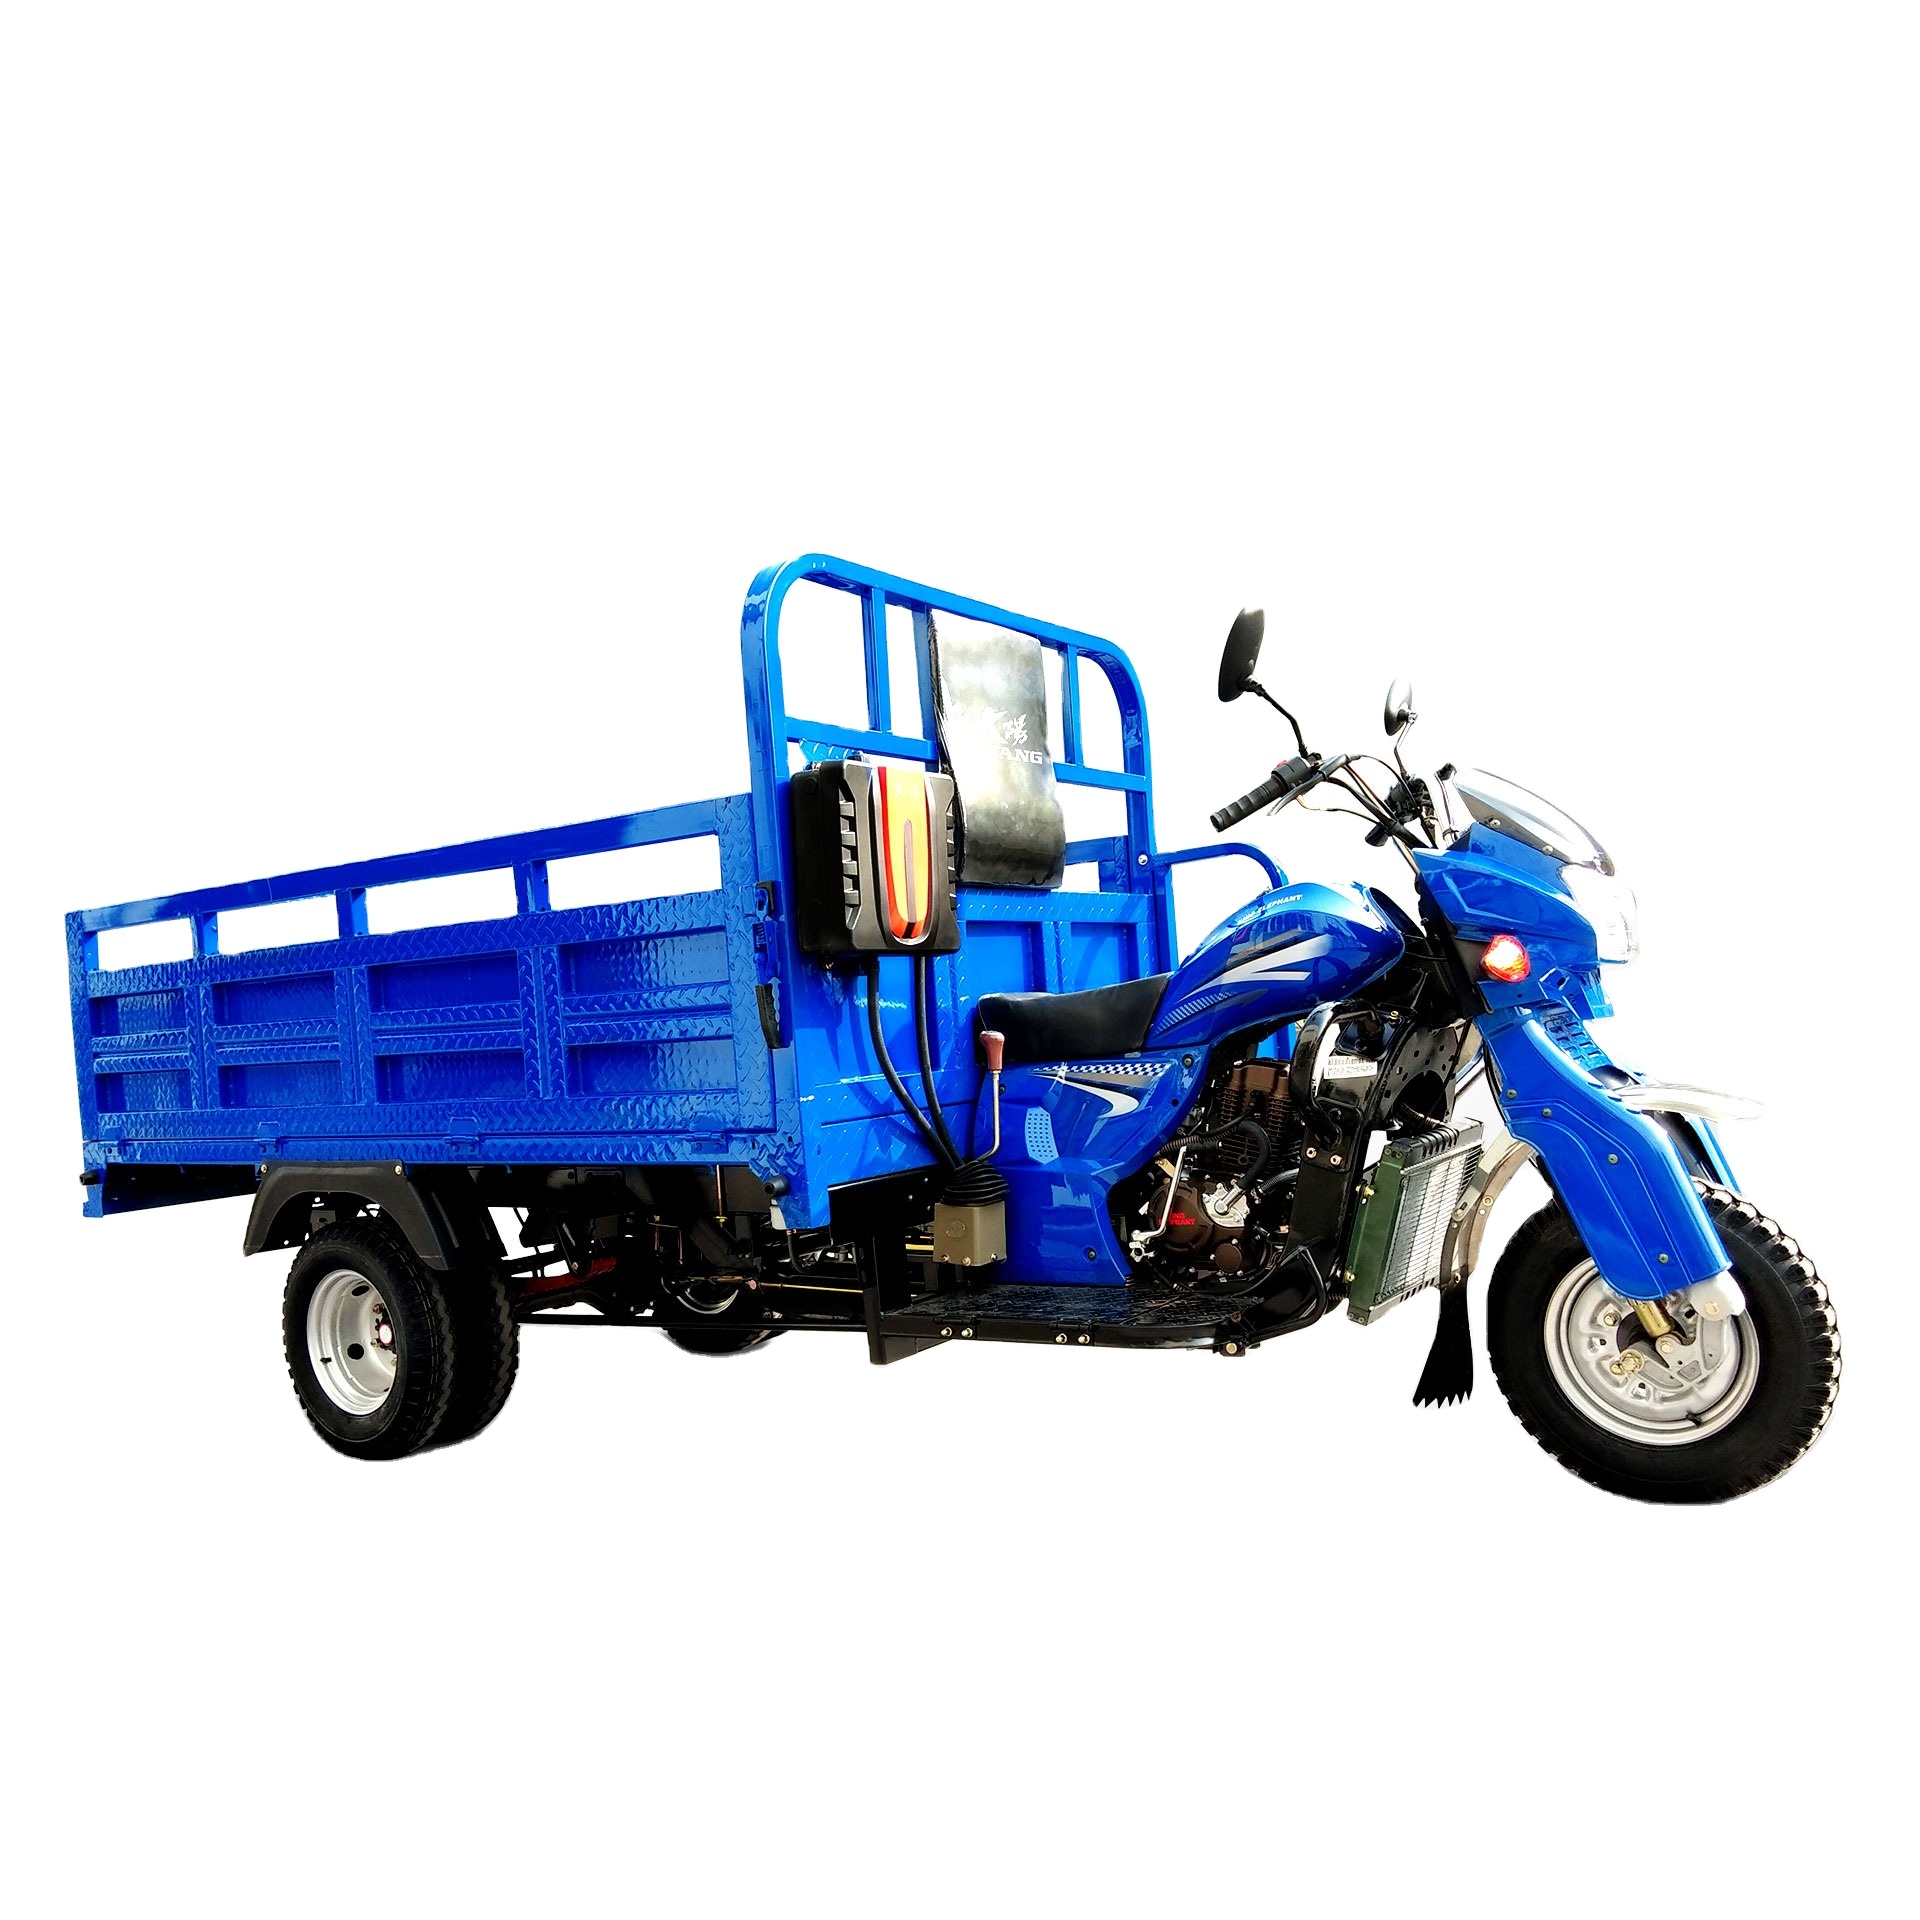 Chongqing DAYANG Brand Hot Selling 150cc Tricycle For Cargo Well Sell Truck bike Five wheels longer cargo box size